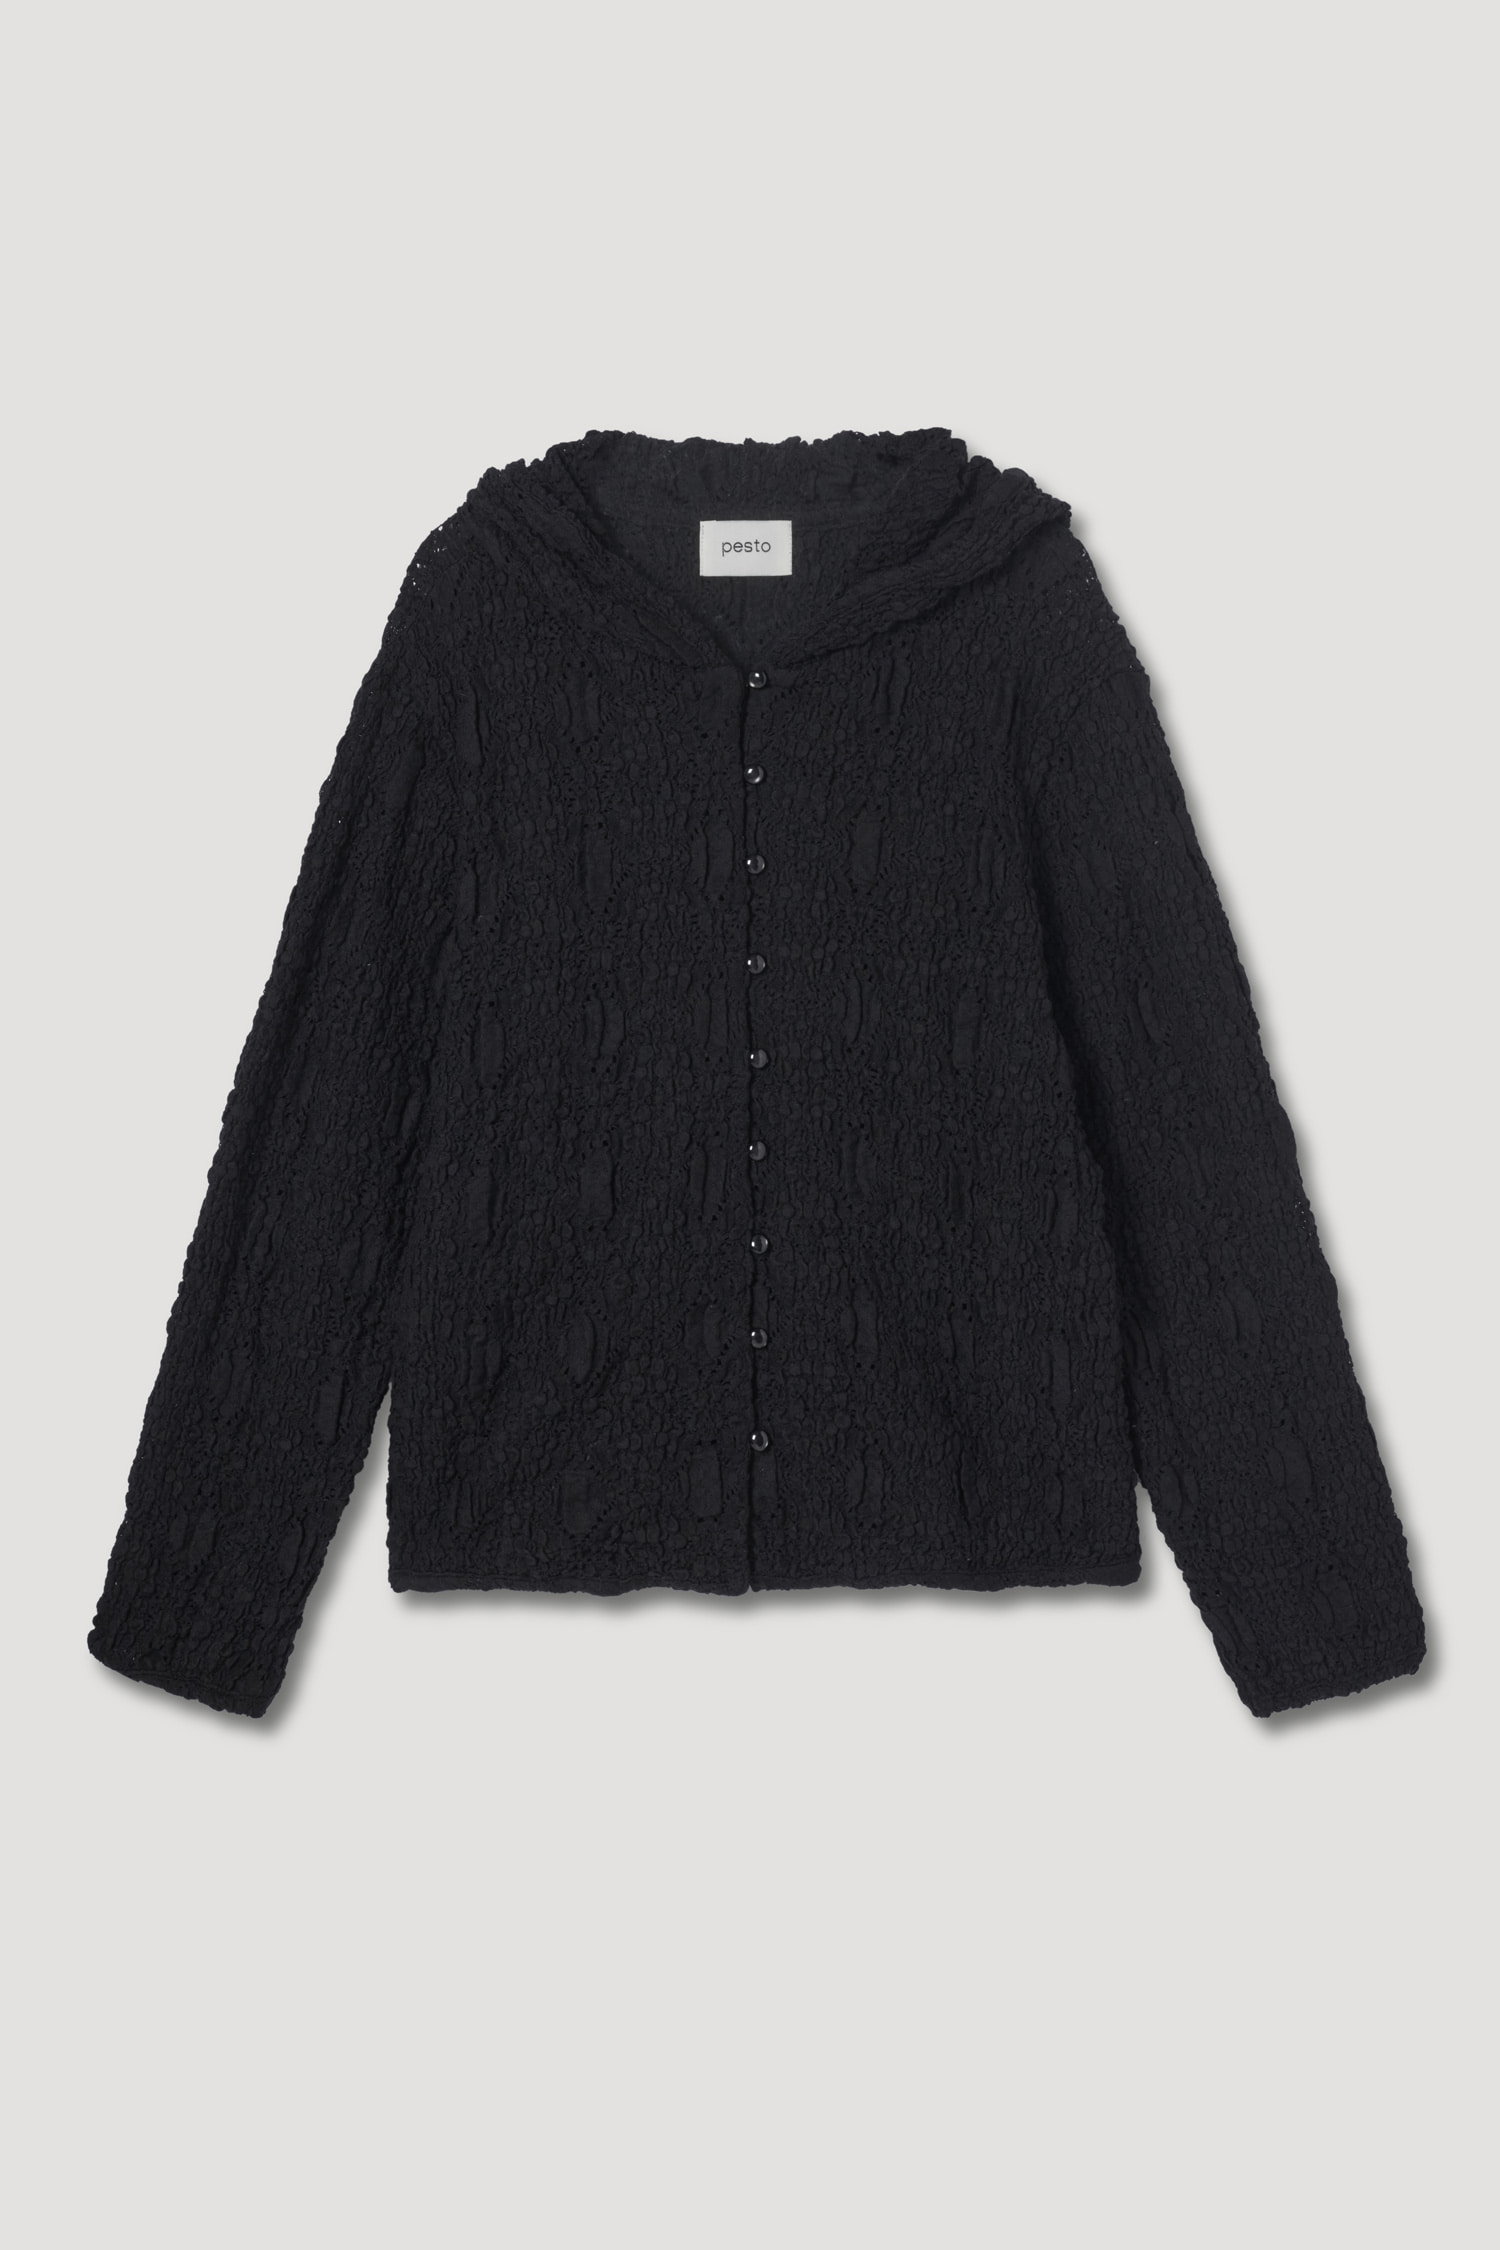 LACE HOODED CARDIGAN BLACK